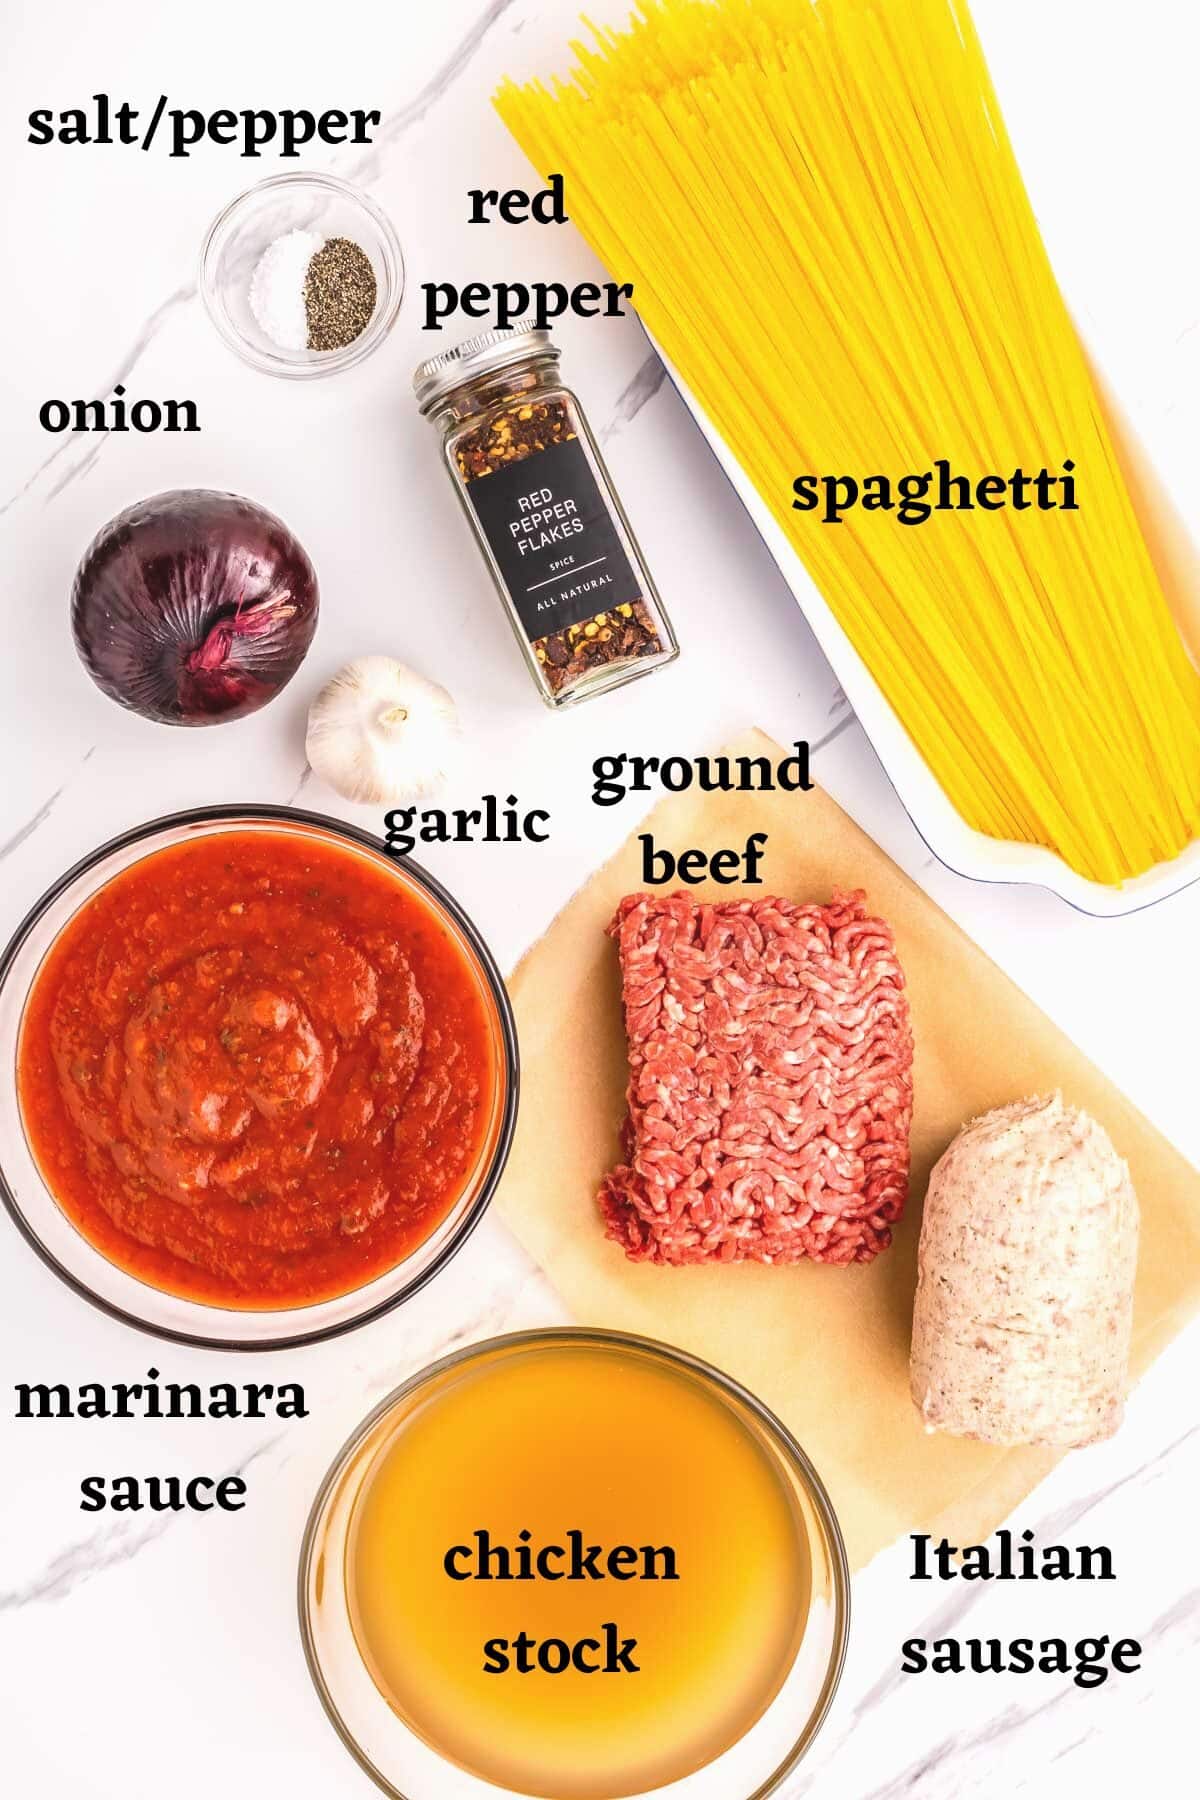 ingredients needed to make One Pot Spaghetti with Sausage